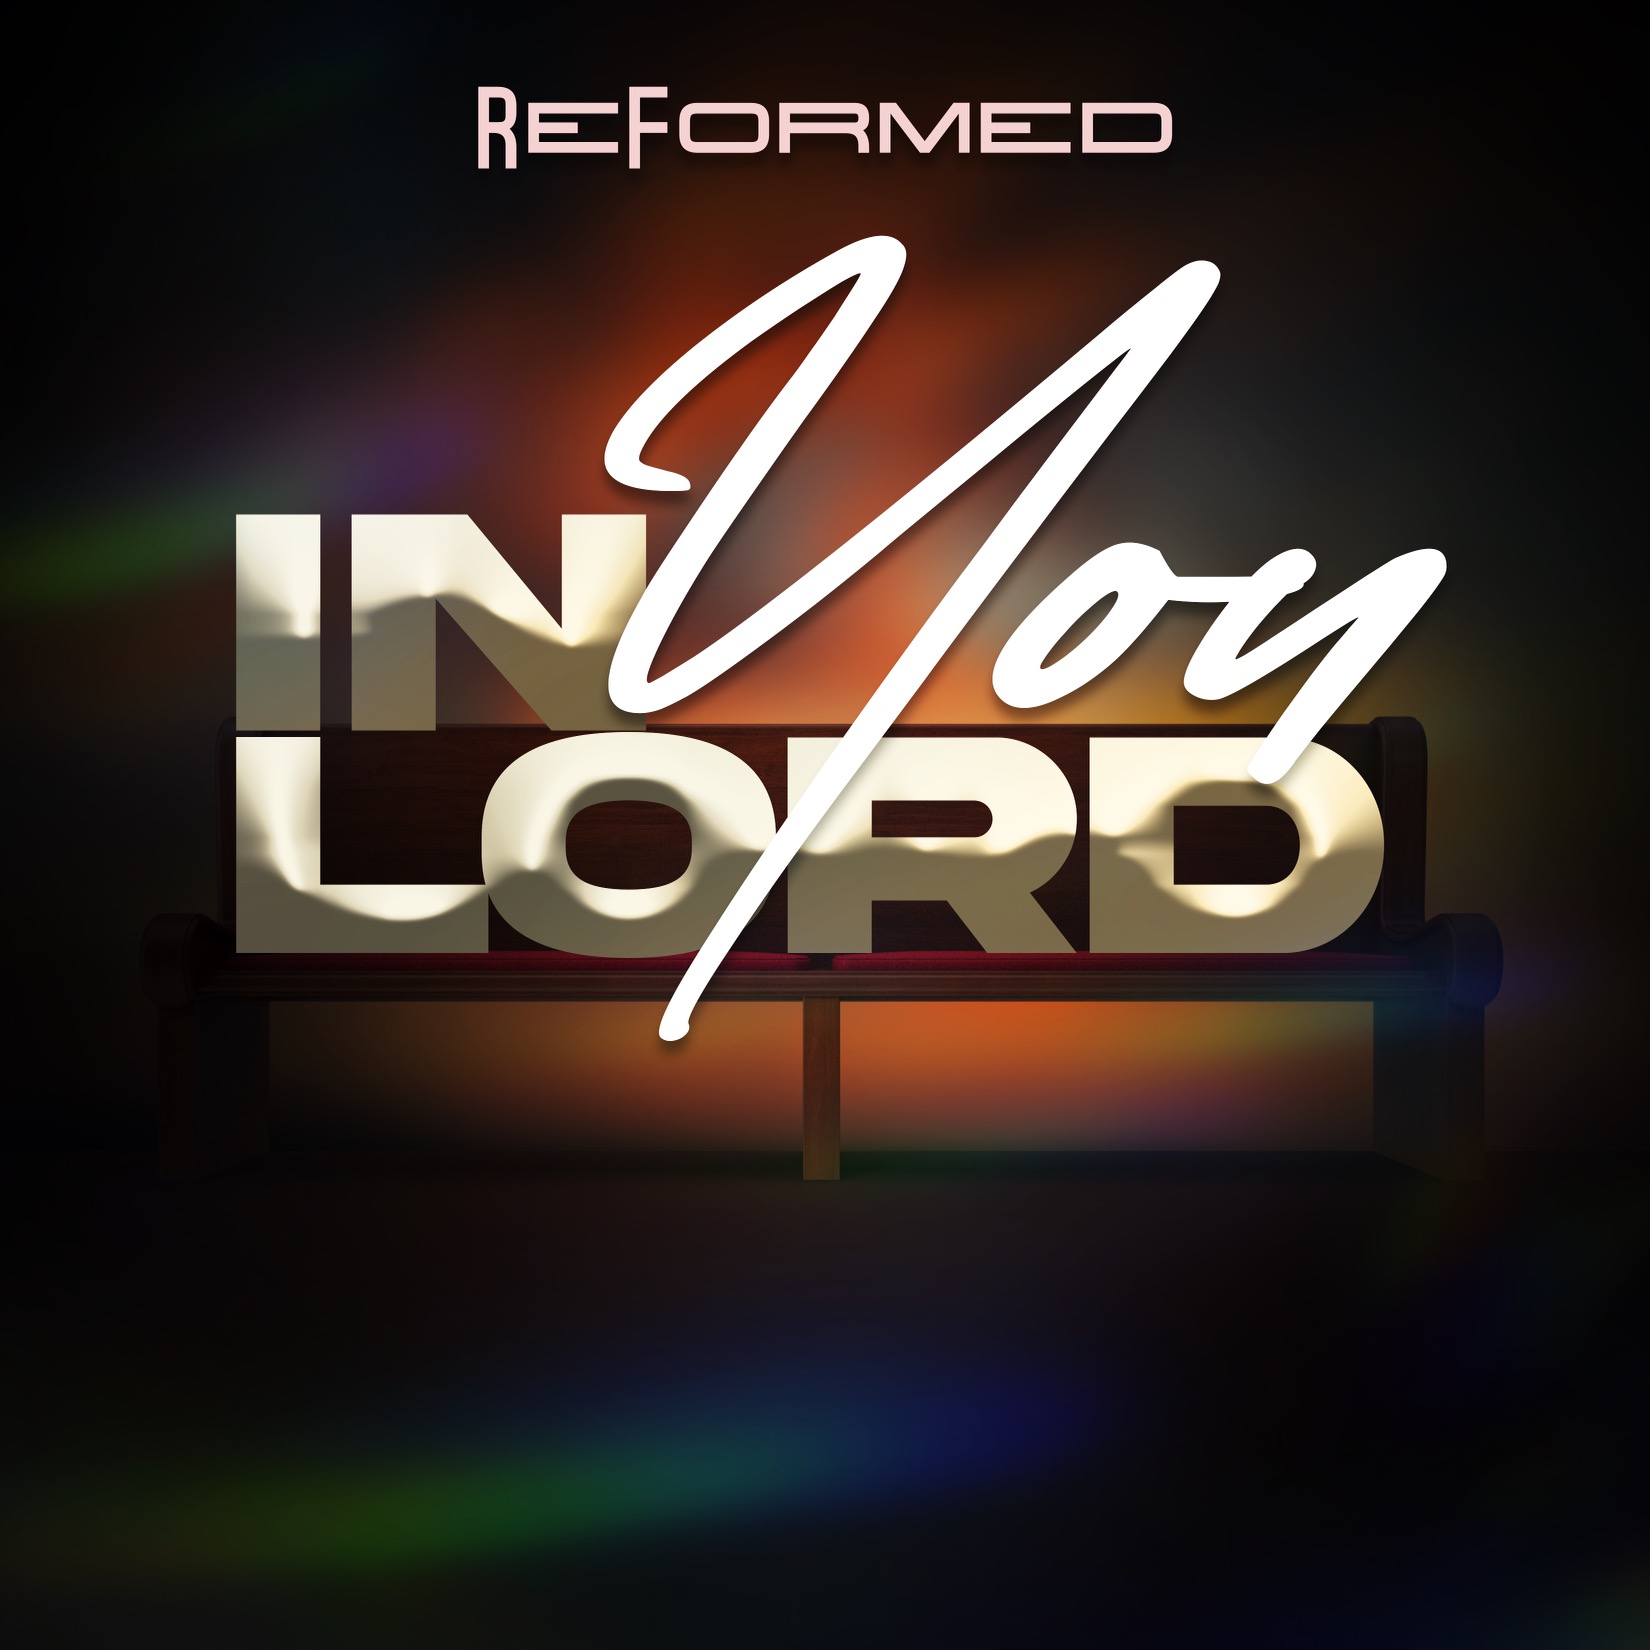 ReFormed - In You Lord